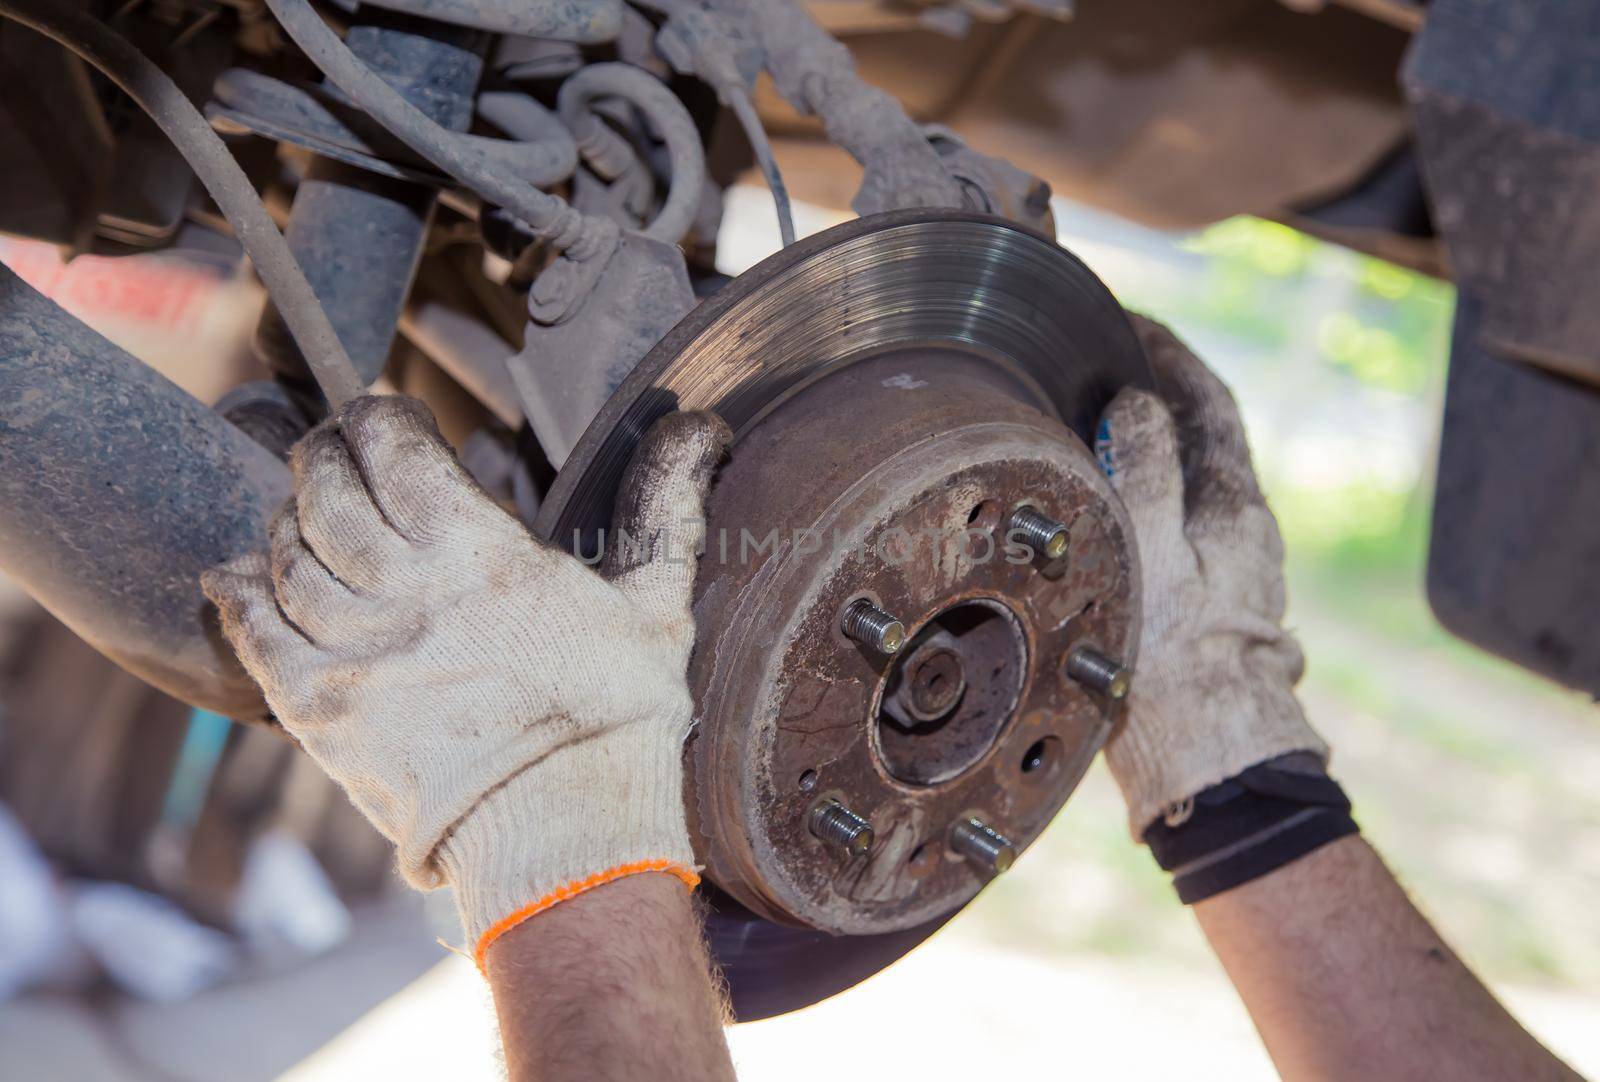 The man's hands remove the worn brake disc from the rear wheel hub. In the garage, a person changes the failed parts on the vehicle. Small business concept, car repair and maintenance service.